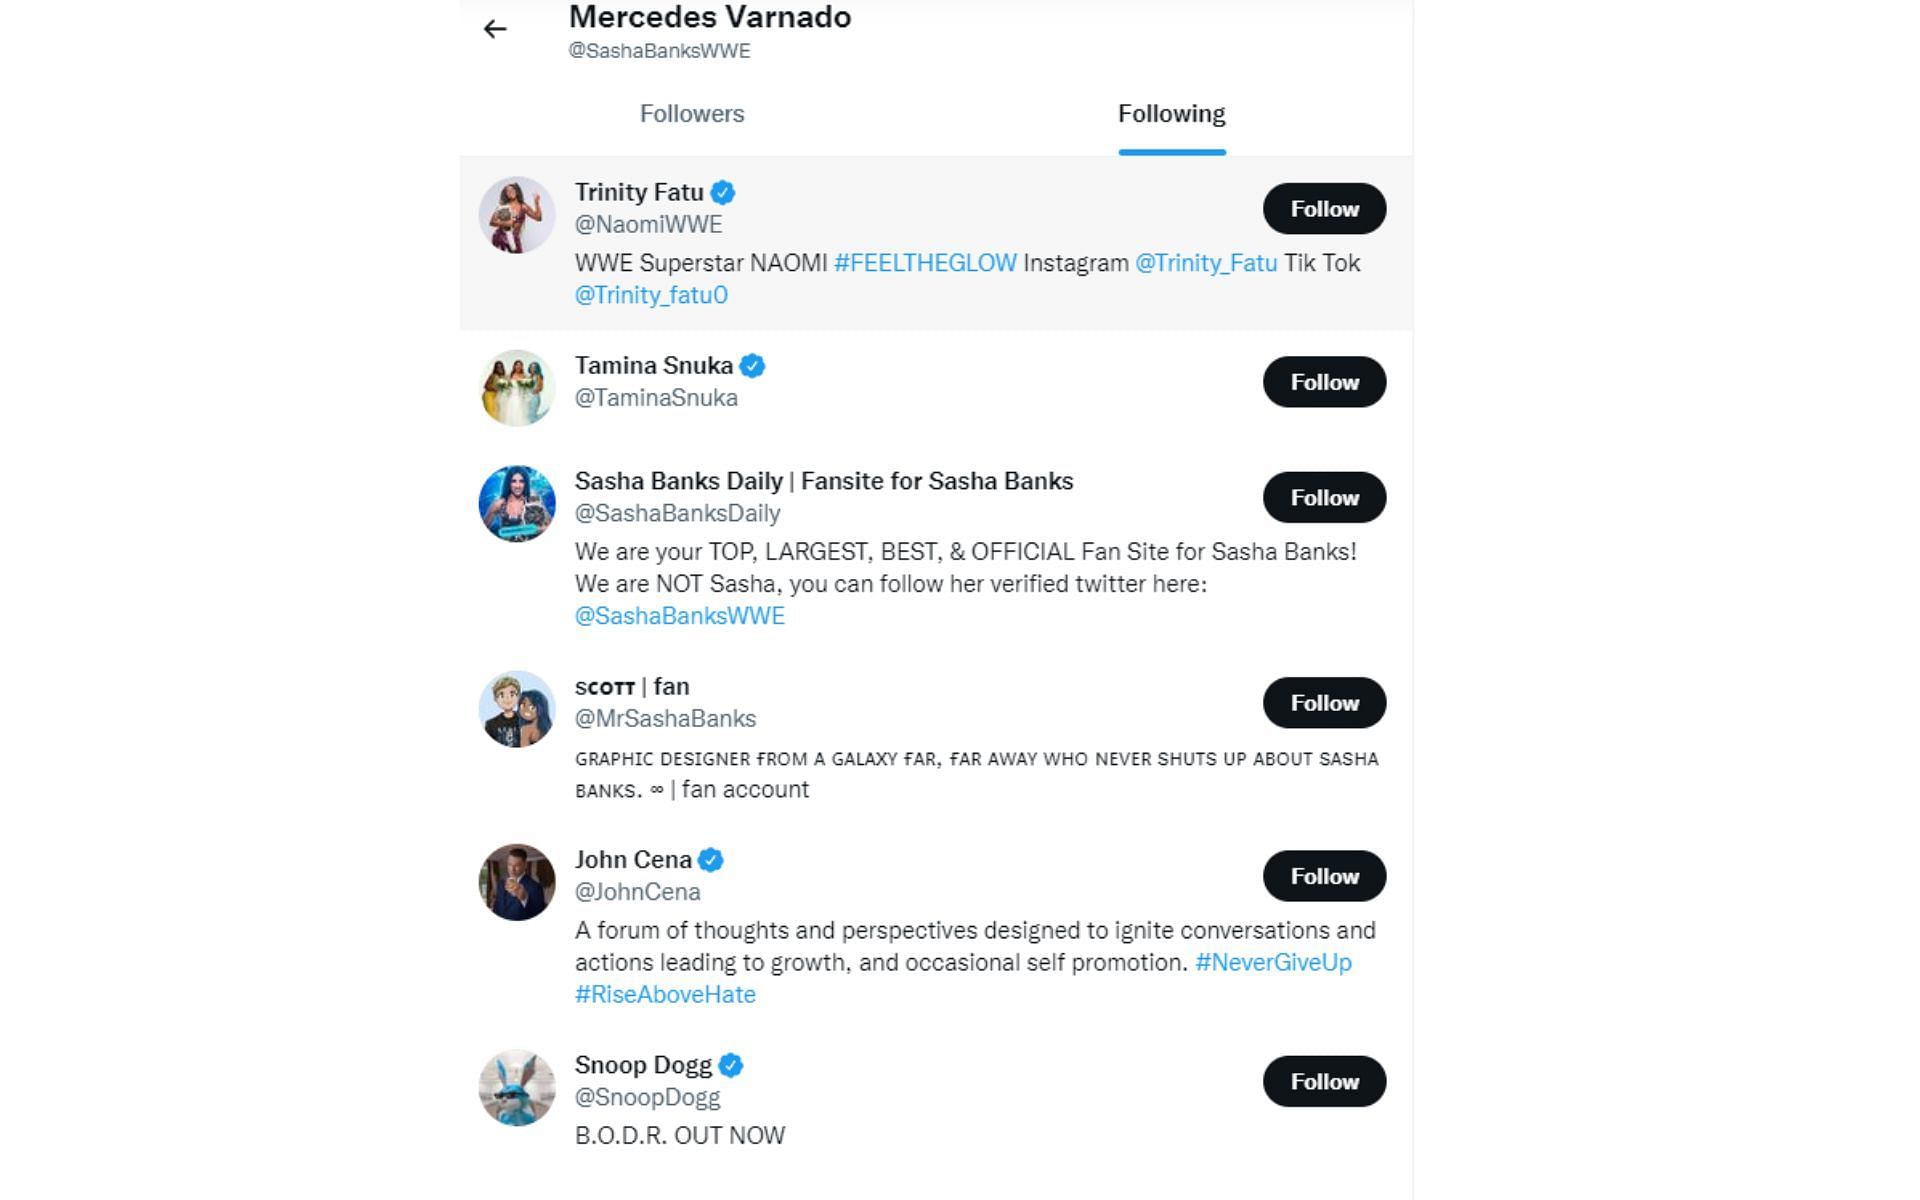 Sasha Banks is only following six accounts on Twitter.